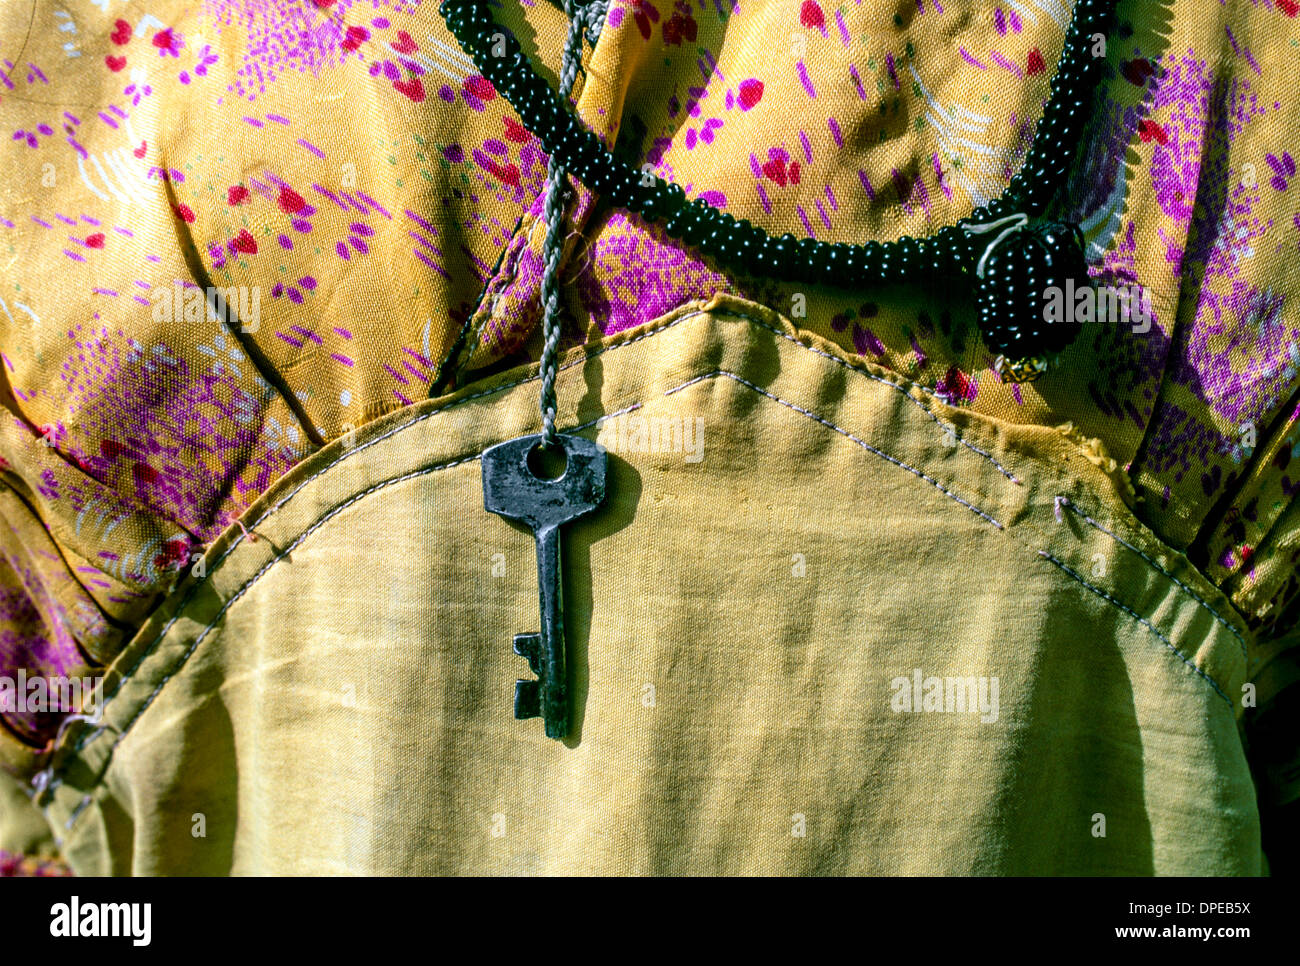 Detail of a yellow patterned hand-made dress & a key necklace worn by a young female lower caste construction worker in Delhi Stock Photo